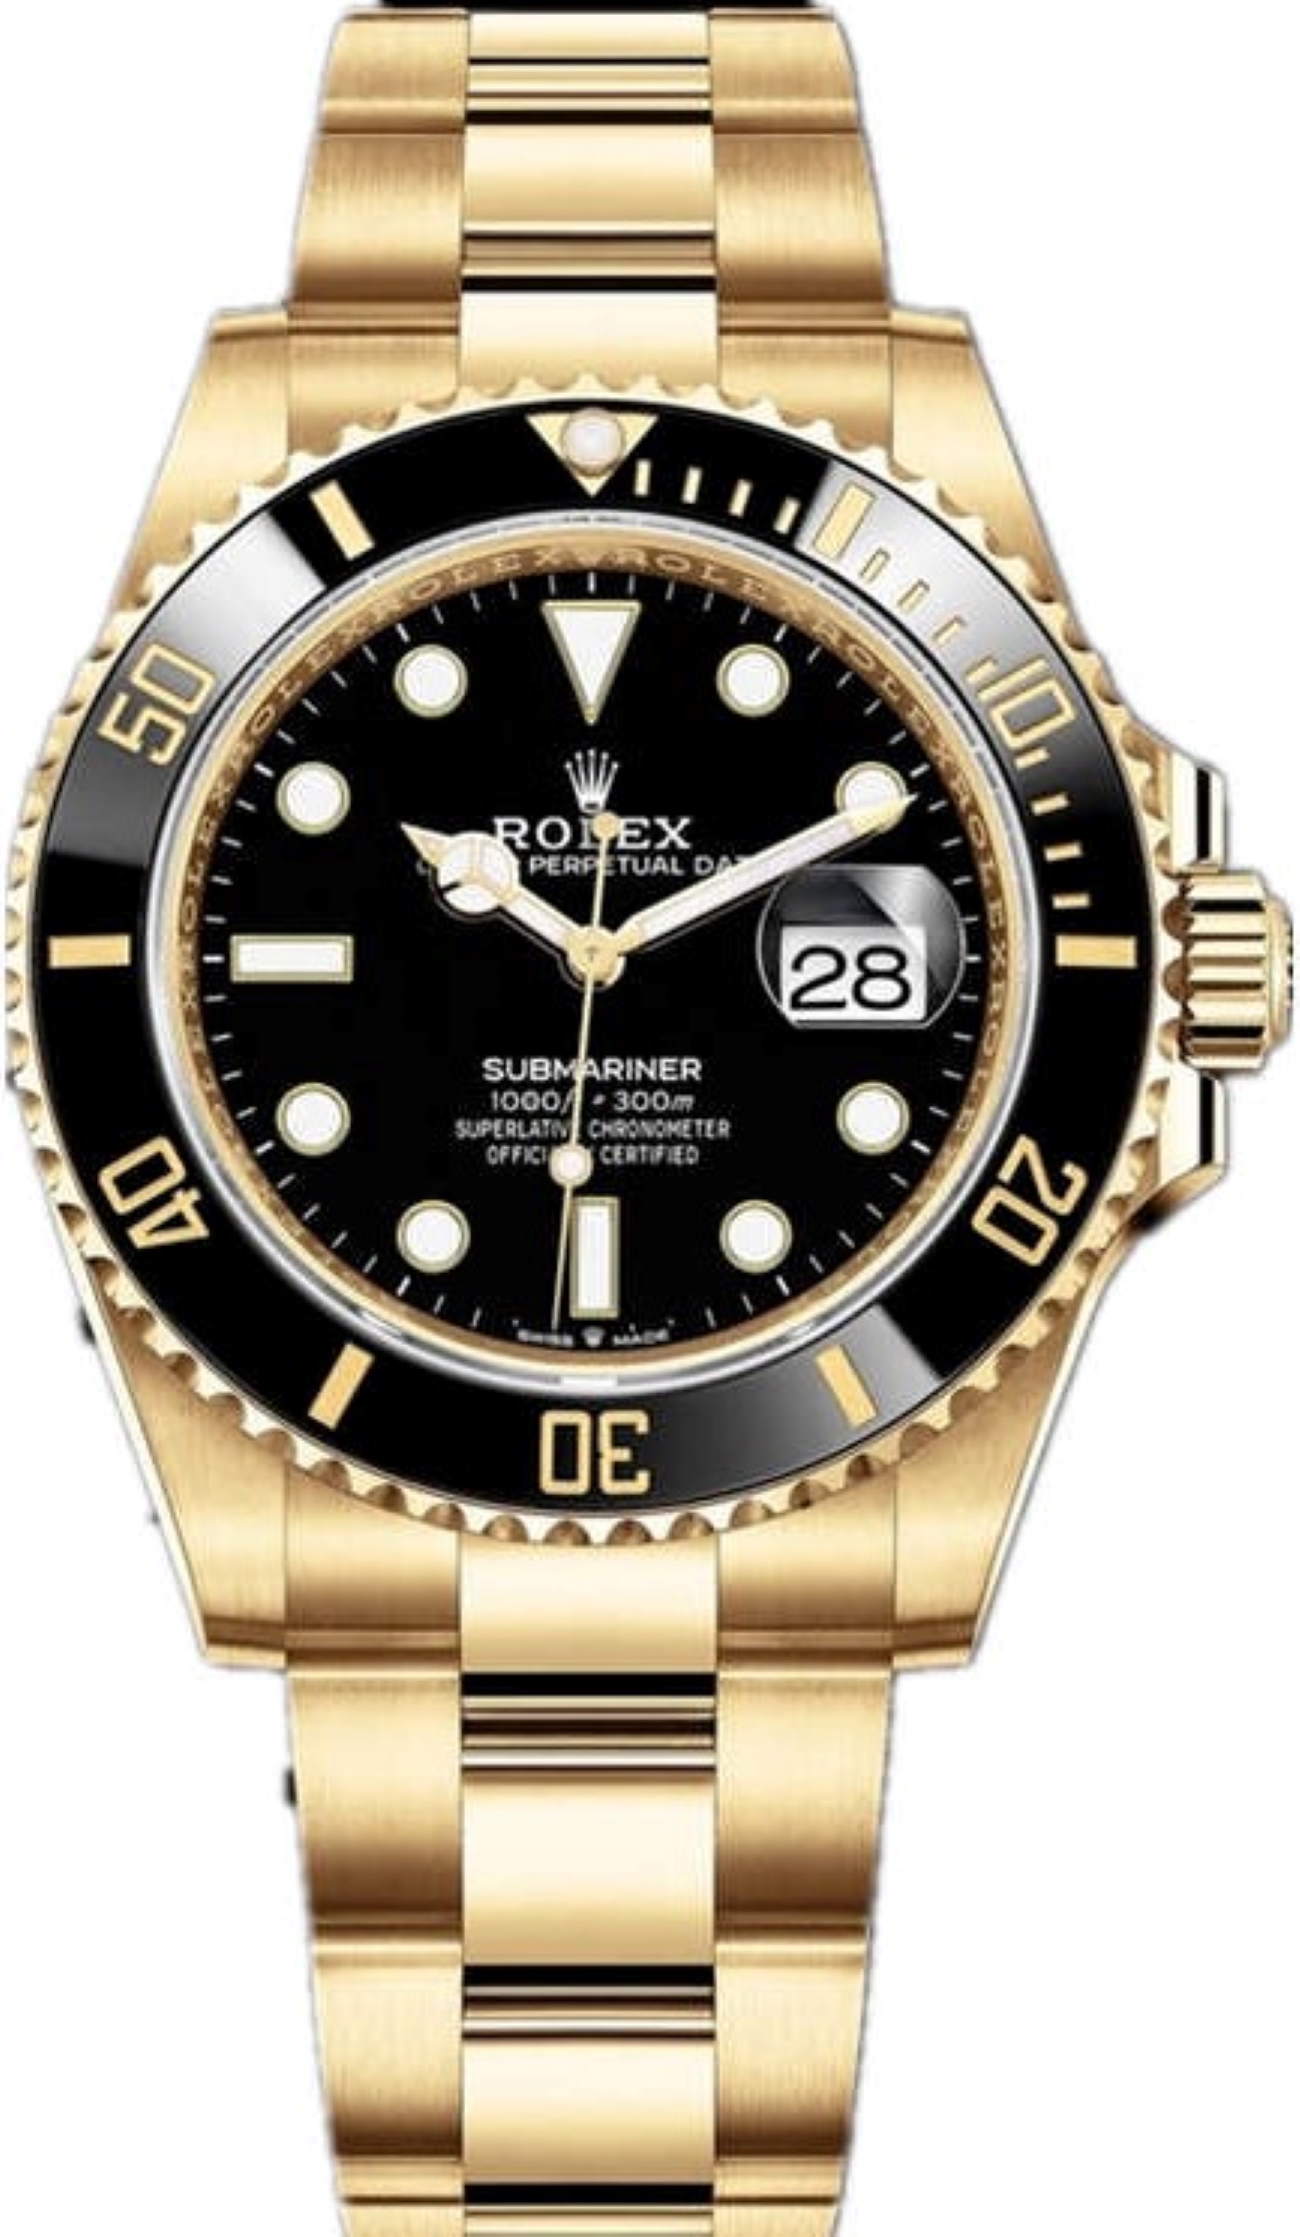 ROLEX SUBMARINER DATE YELLOW GOLD BLACK DIAL 41MM REF: 126618LB